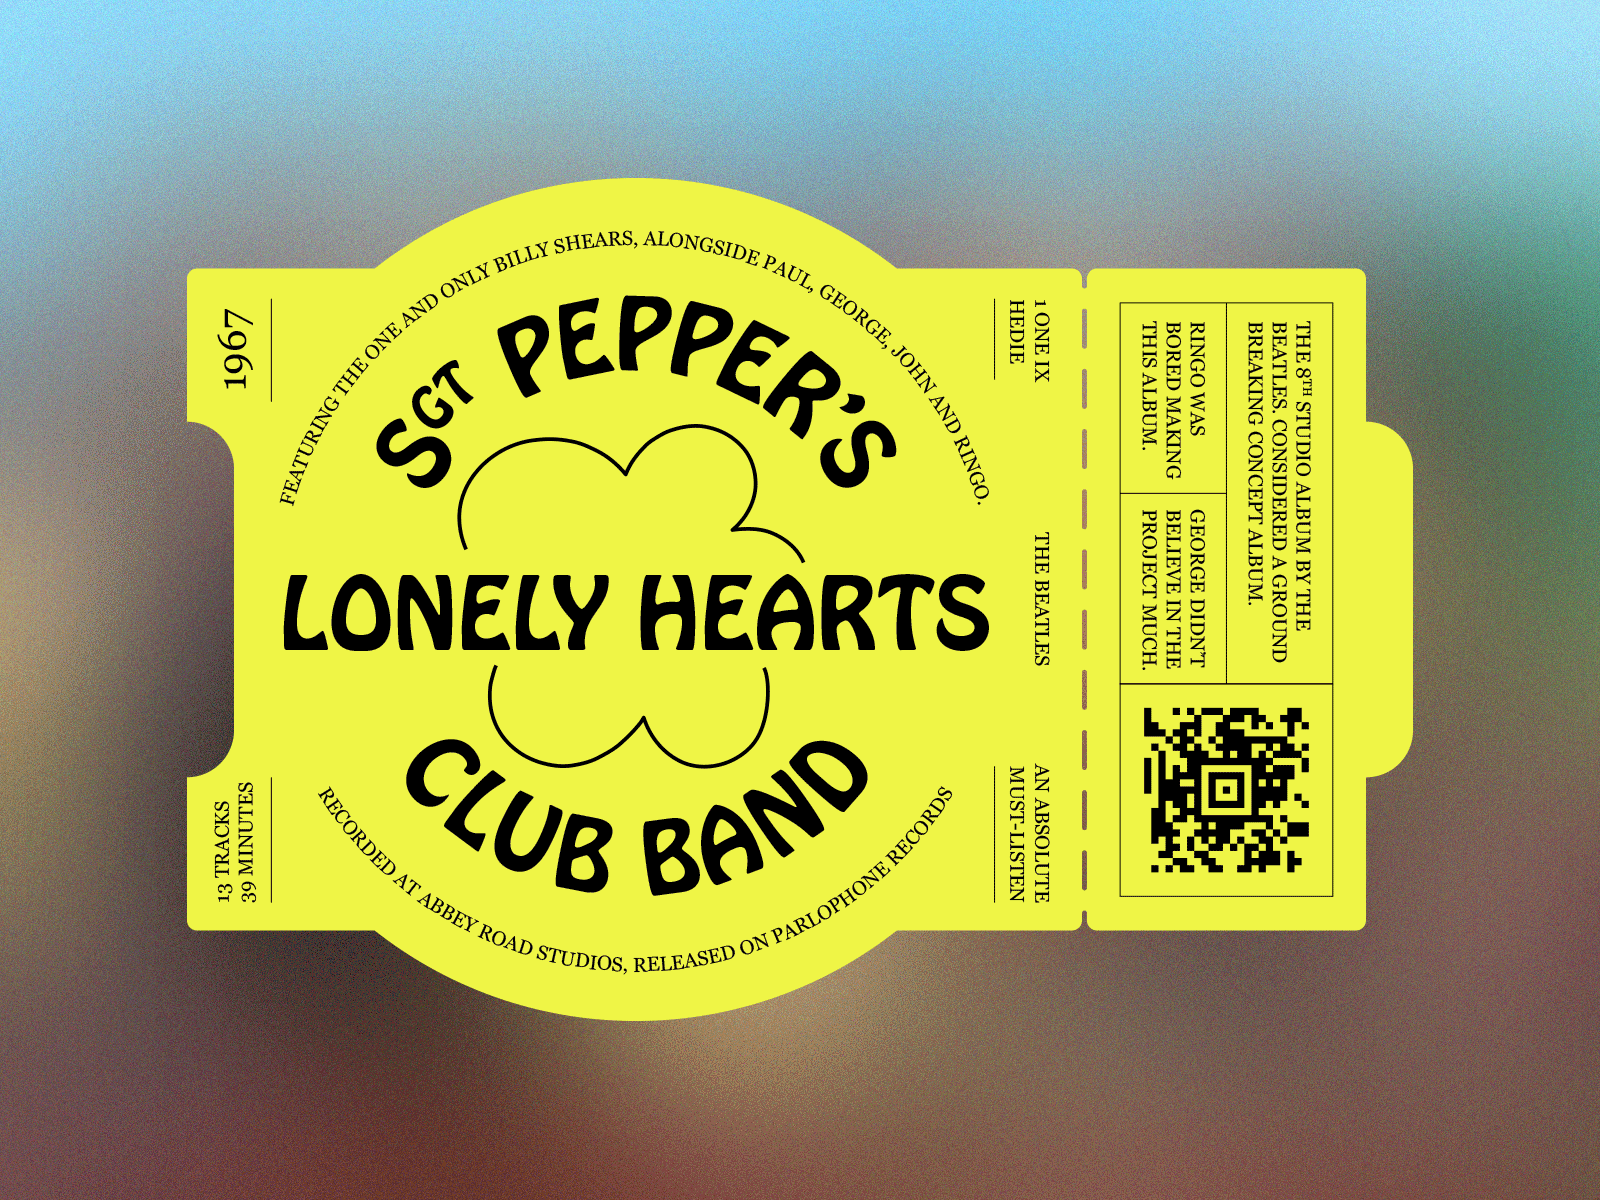 Sgt Pepper's Lonely Hearts Club Band – Record Labels #009